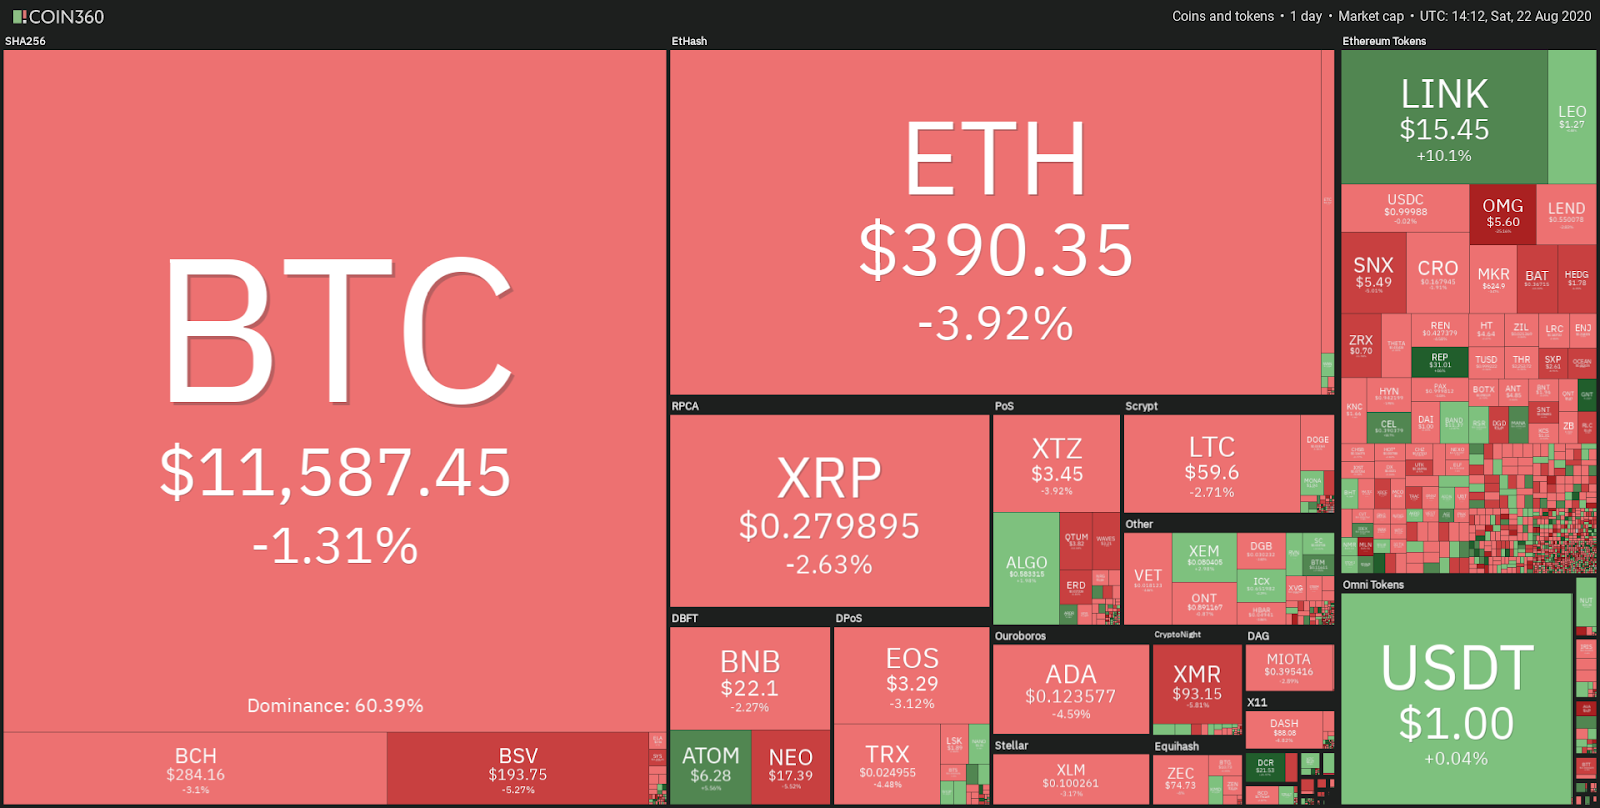 Crypto market daily performance snapshot. Source: Coin360